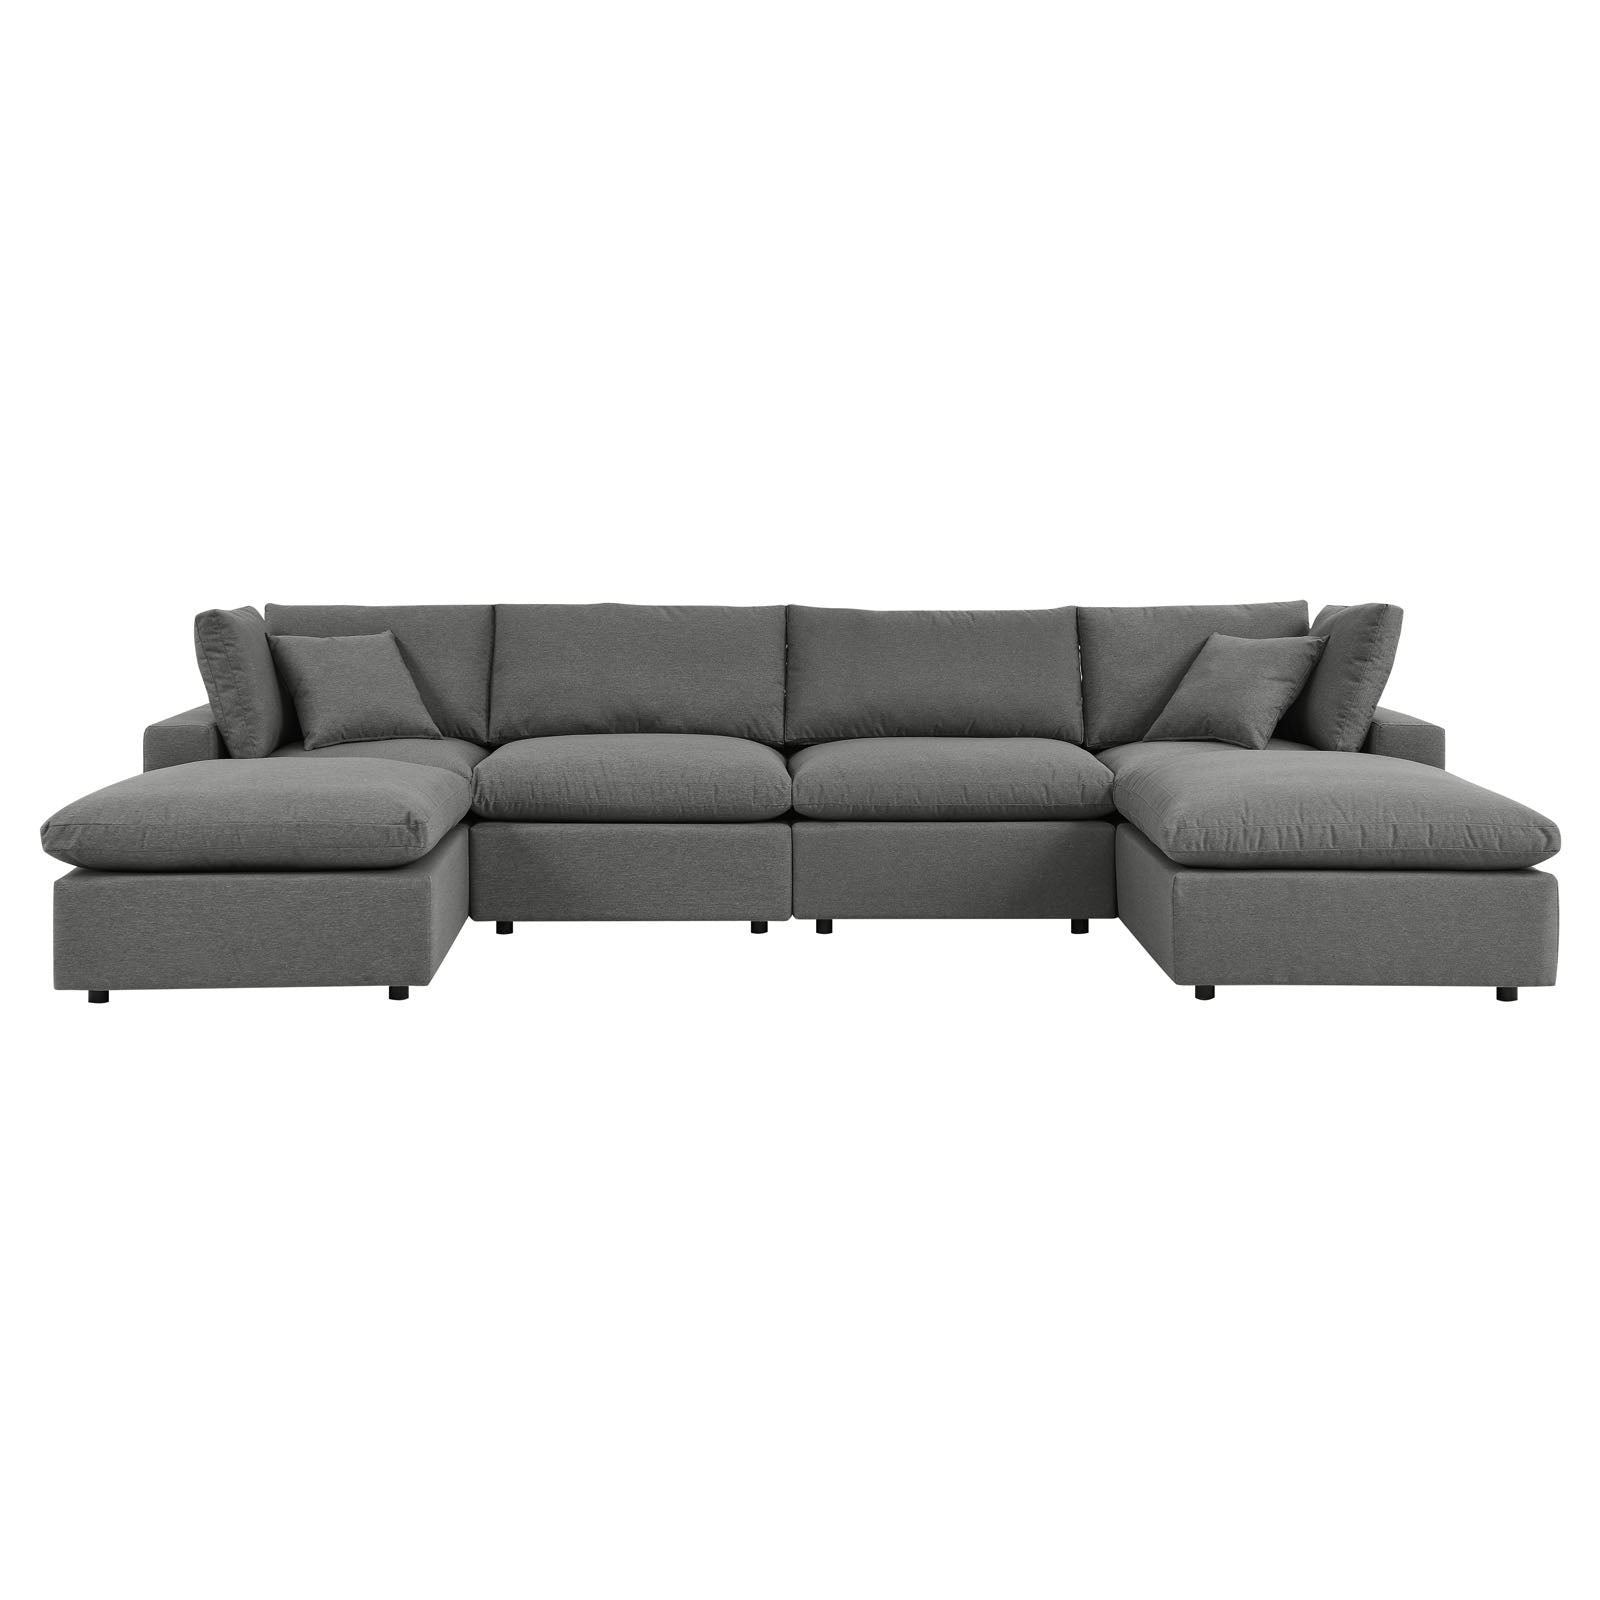 Modway Outdoor Sofas - Commix 6-Piece Outdoor Patio Sectional Sofa Charcoal